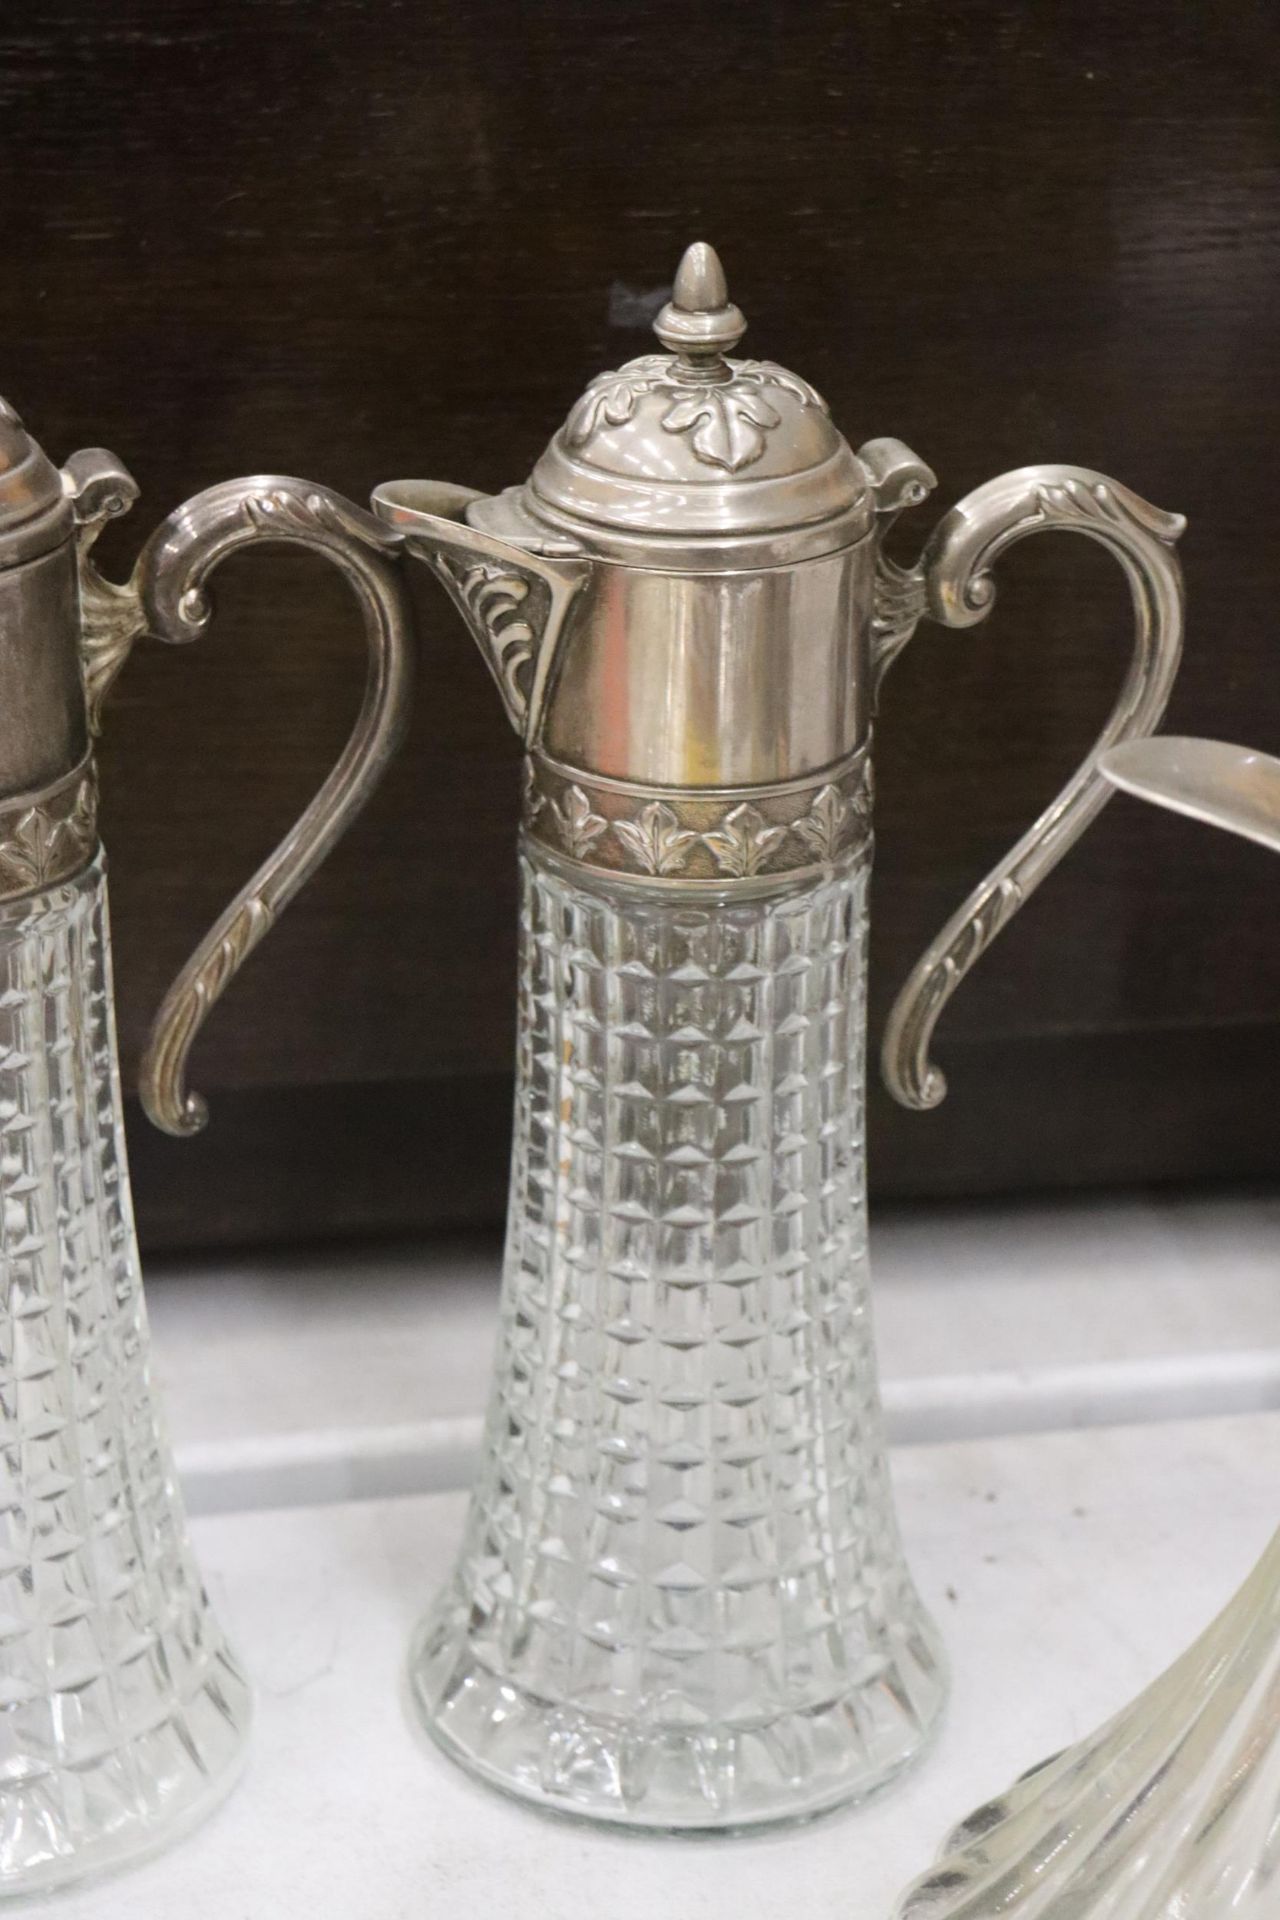 TWO VINTAGE CLARET JUGS WITH SILVER PLATED TOPS PLUS A BELL BOTTOM DECANTER MISSING FINIAL - Image 7 of 8